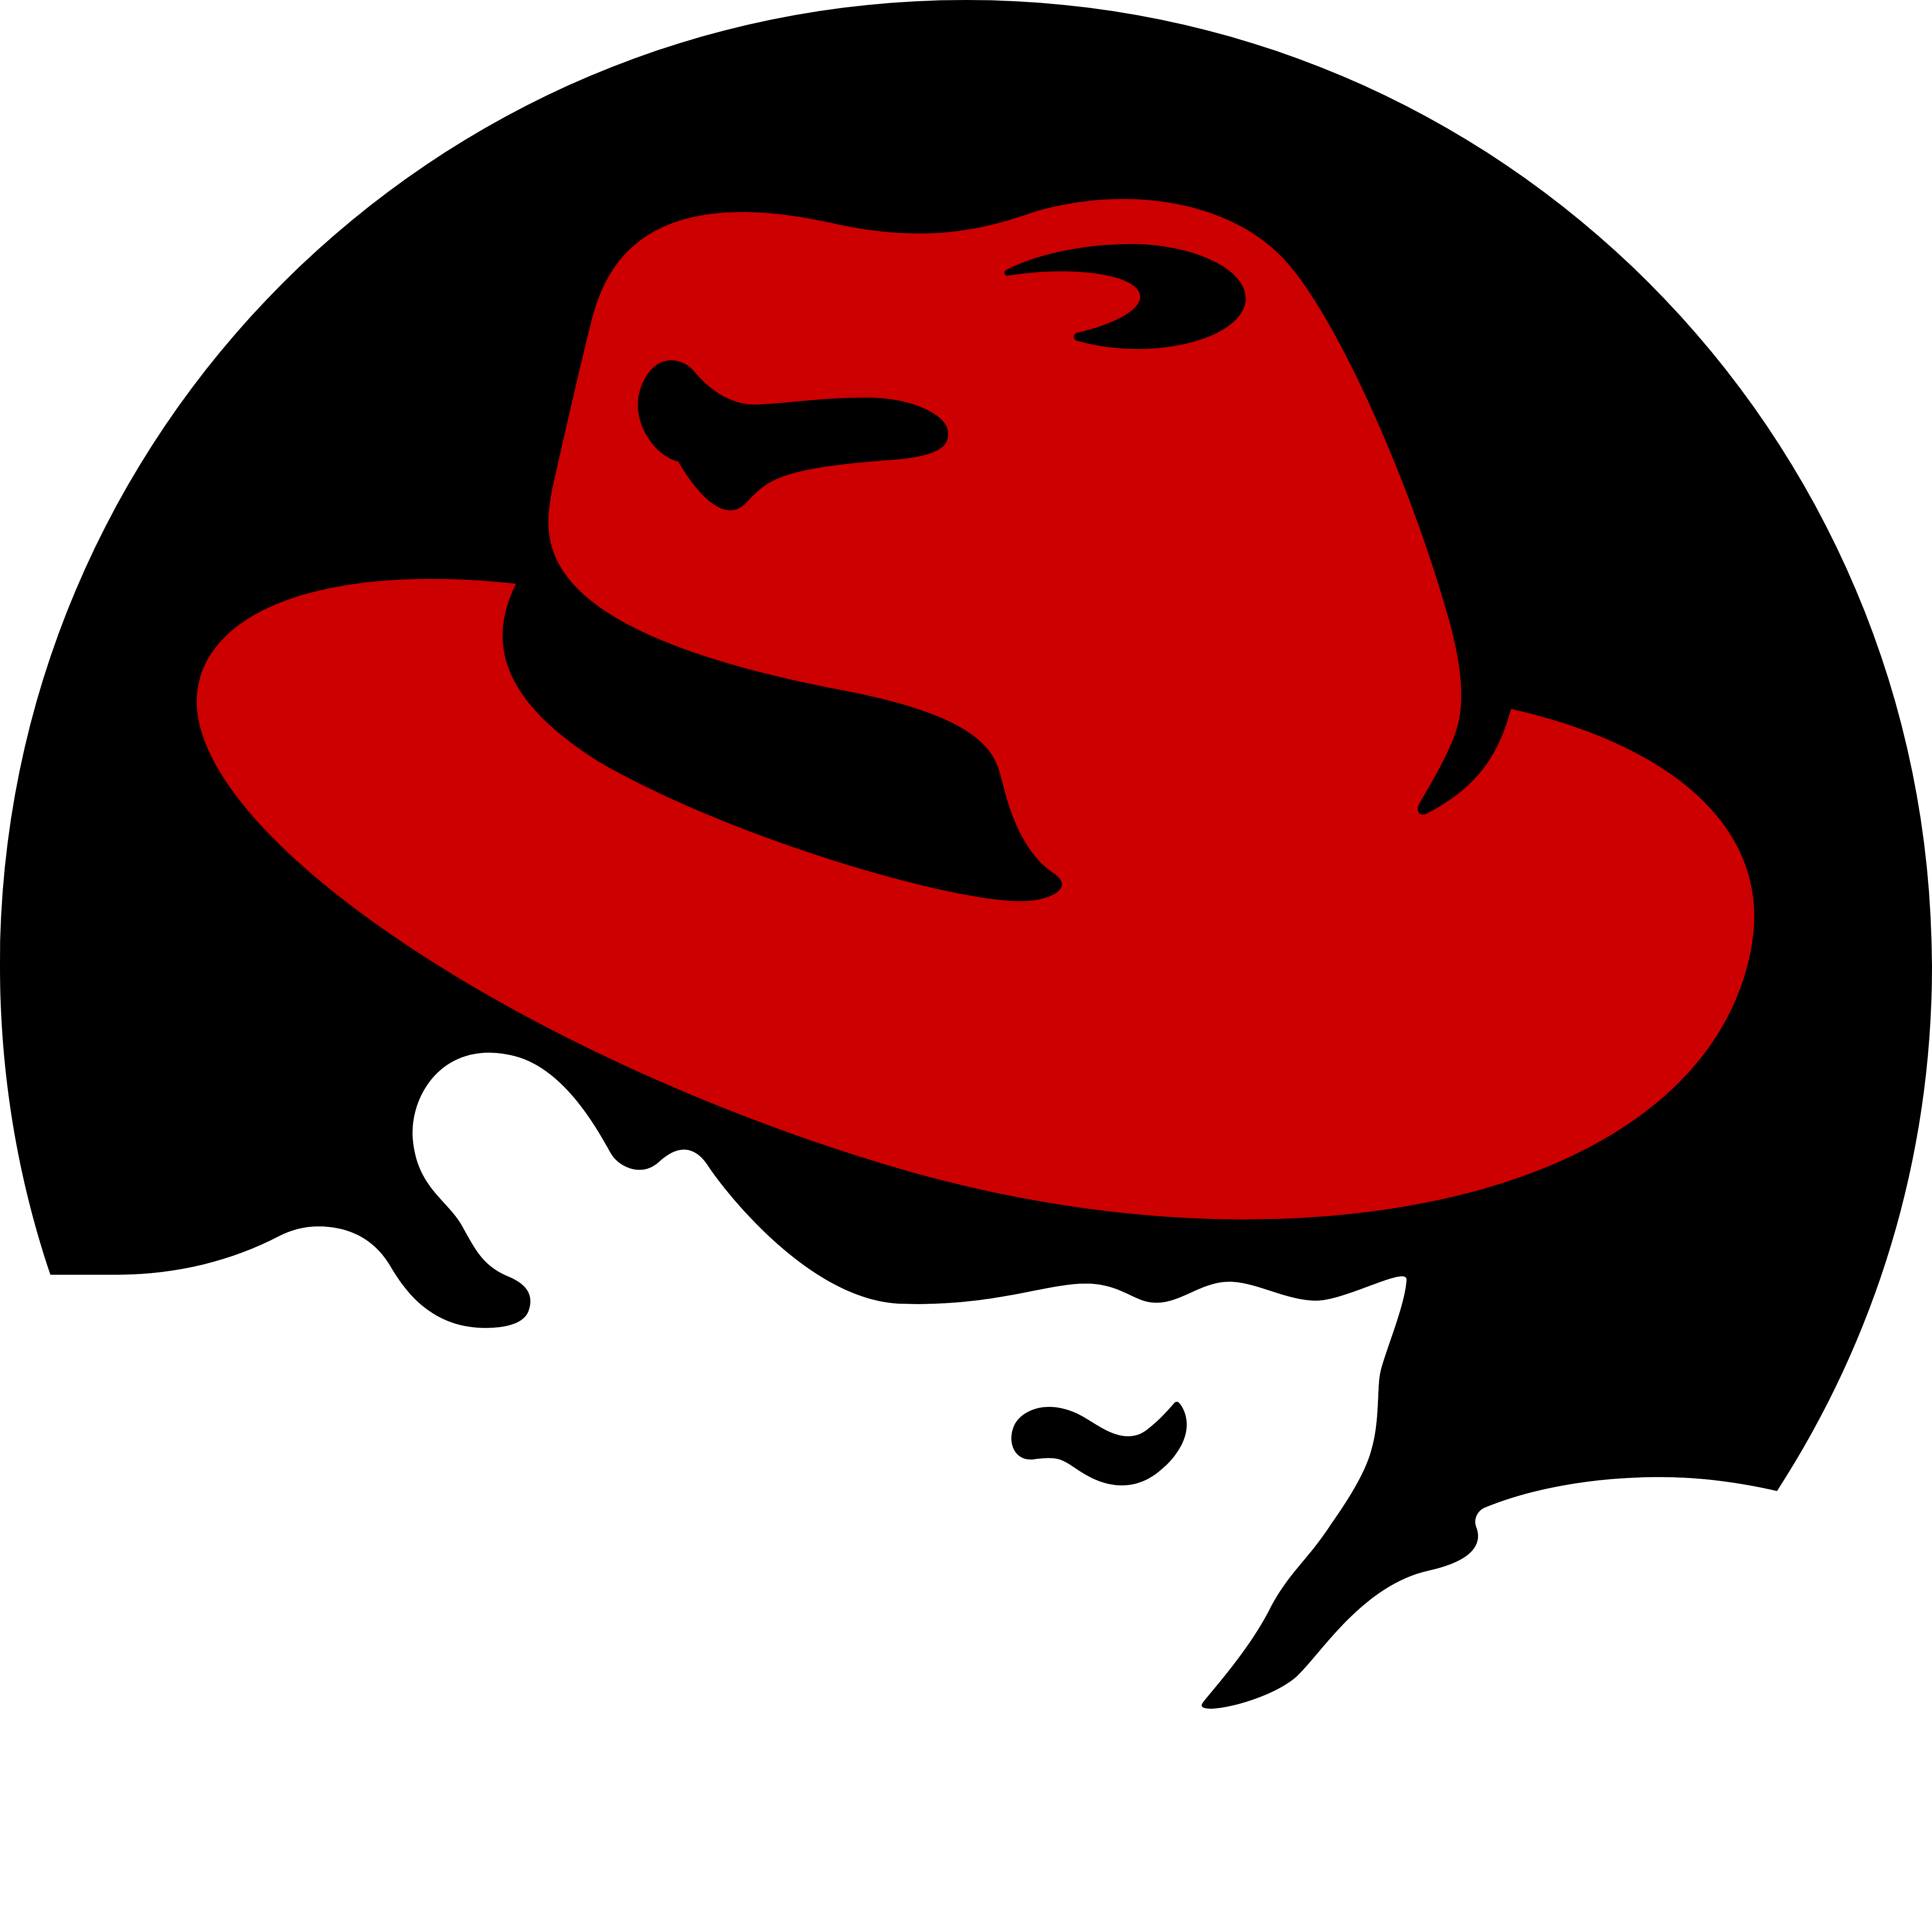 Red Hat - Red Hat Linux (5000x5000)